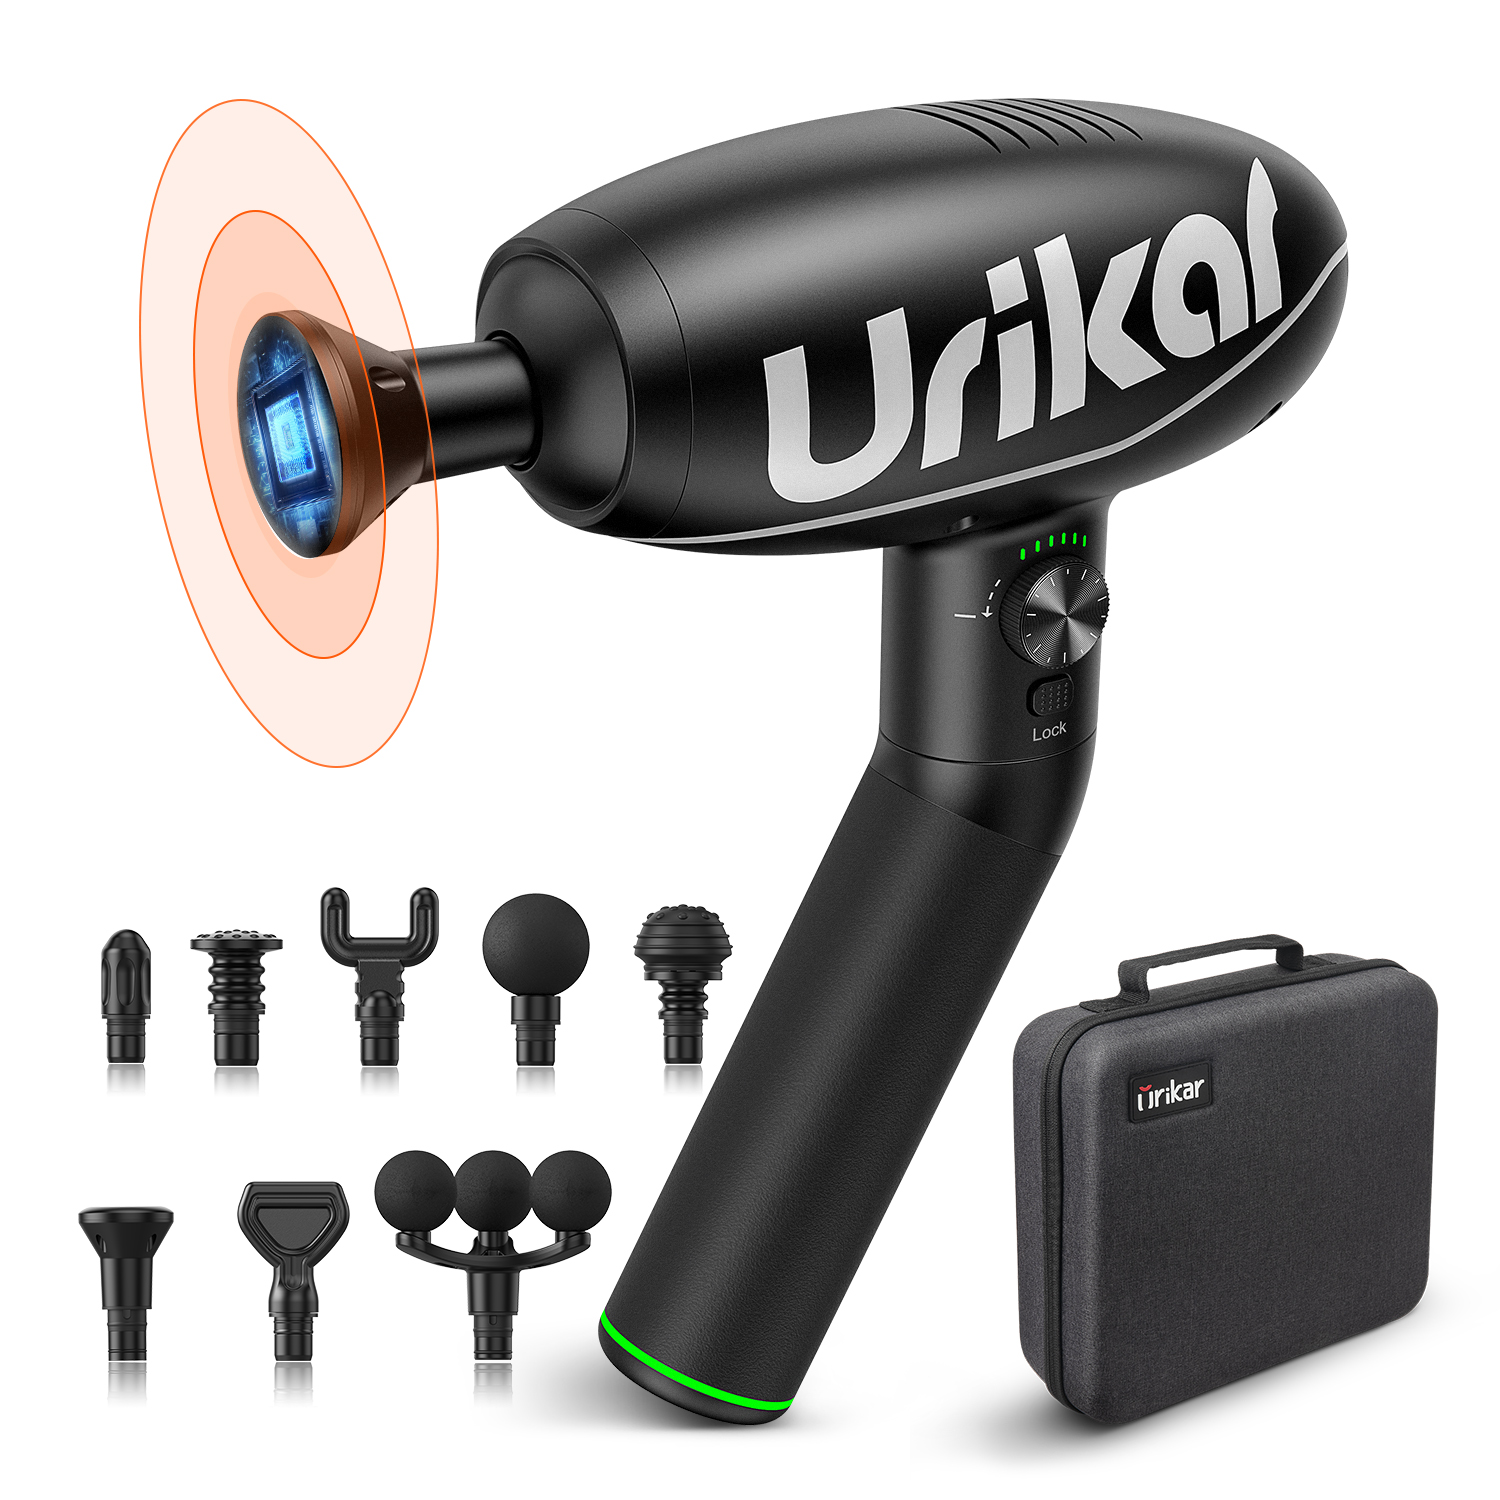 Urikar Pro 1 Percussion Massager with Heated Head on Sale Now